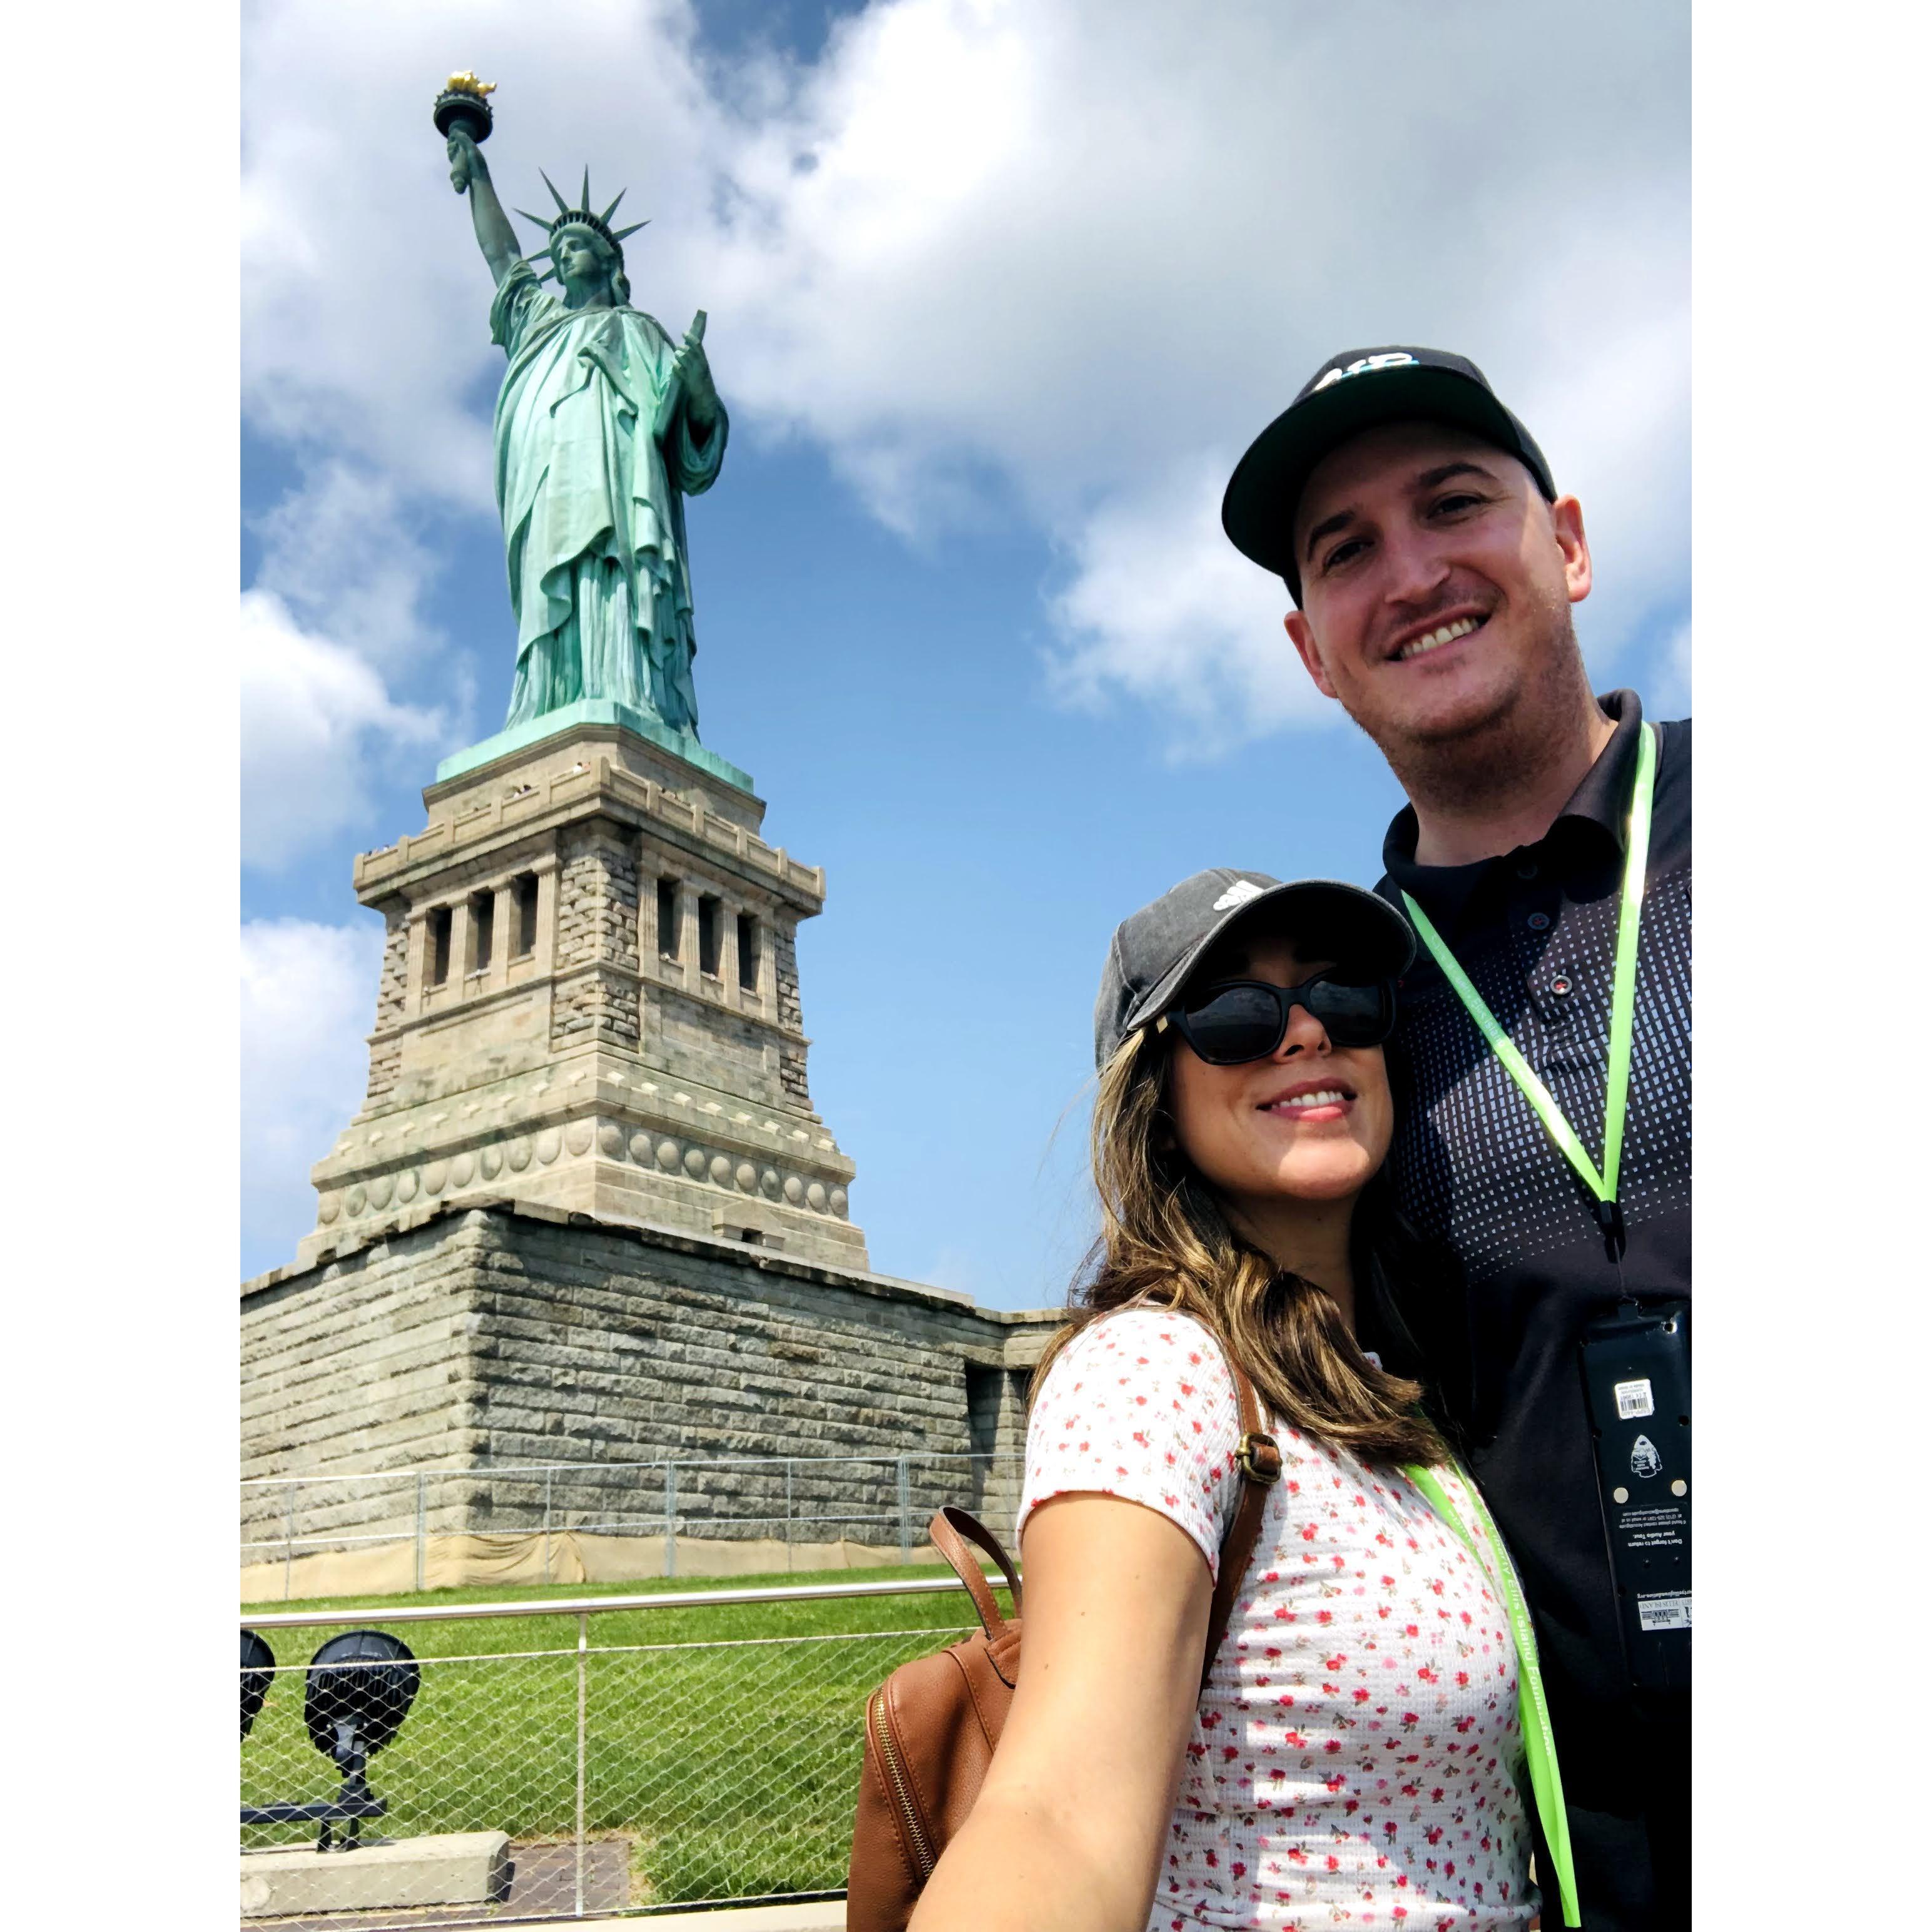 Where: Statue of Liberty National Monument, New York 
When: July 28, 2021
Why: Visiting Andy's Sister Kris just before she moved back to San Diego